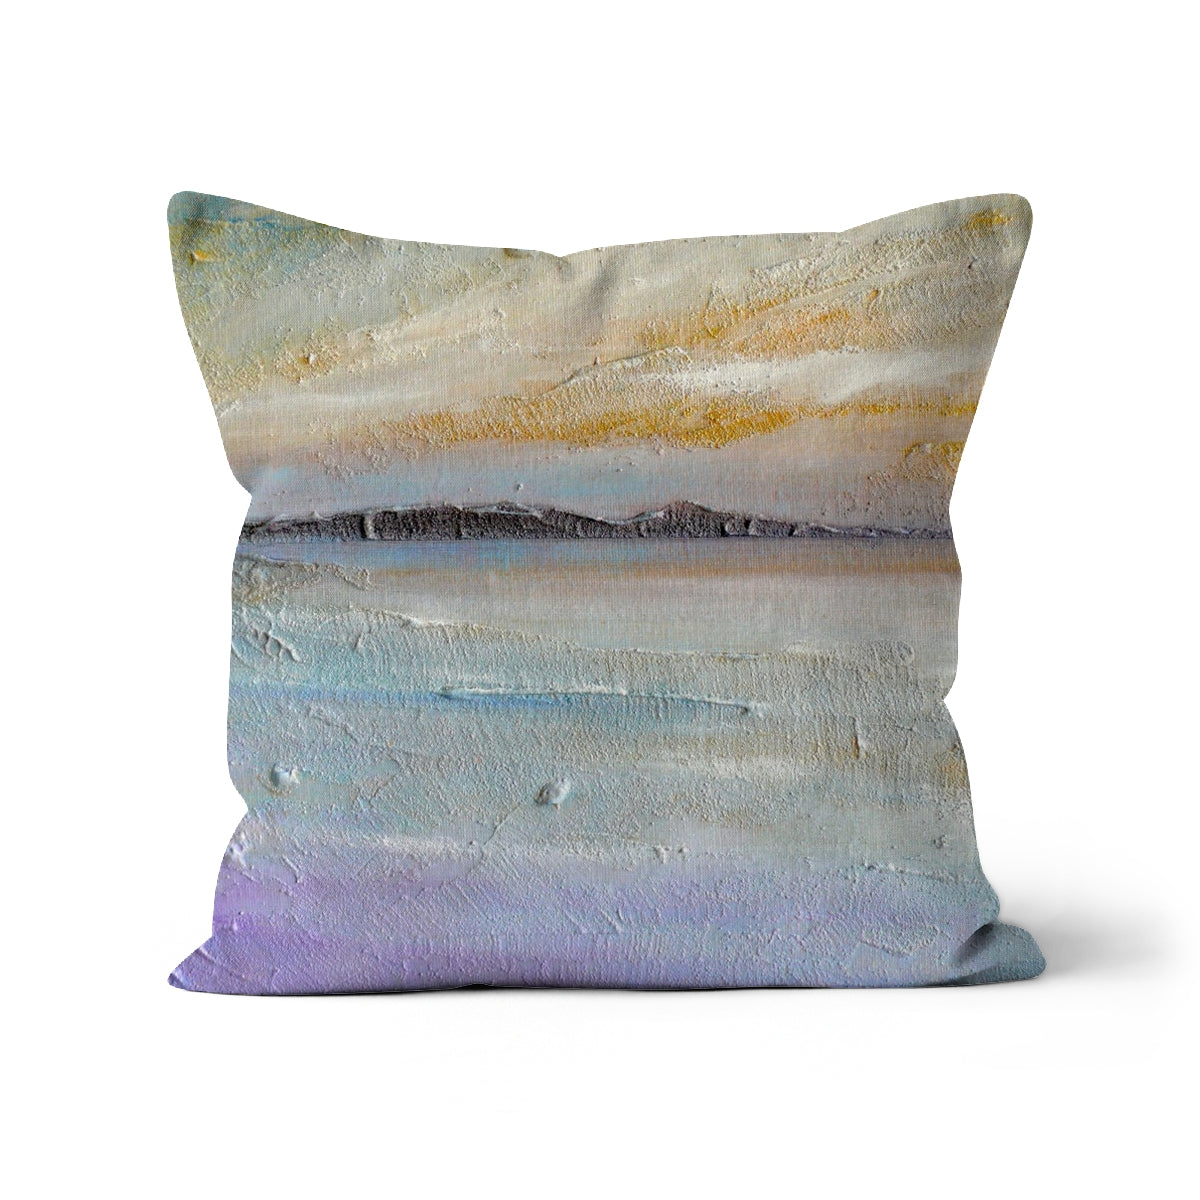 Sollas Beach South Uist Art Gifts Cushion-Cushions-Hebridean Islands Art Gallery-Faux Suede-18"x18"-Paintings, Prints, Homeware, Art Gifts From Scotland By Scottish Artist Kevin Hunter